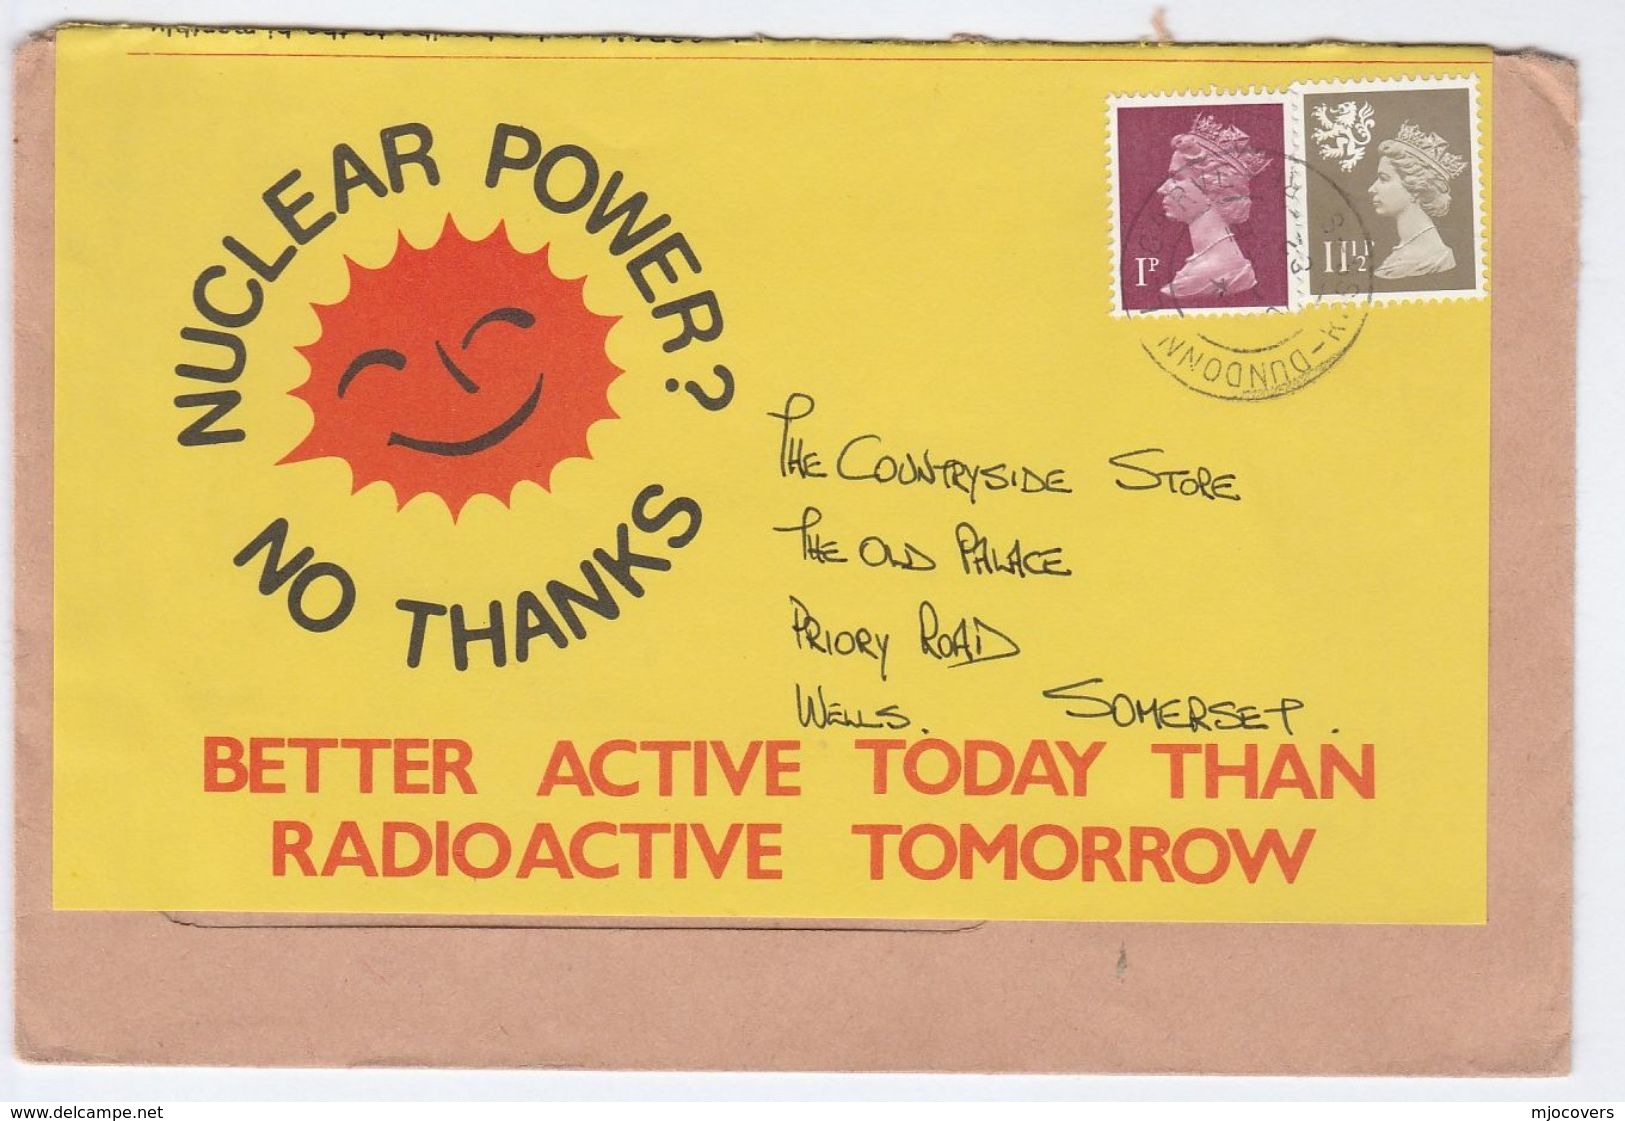 1982 Dundonnell NUCLEAR POWER NO THANKS COVER Re-use Label BETTER ACTIVE TODAY THAN RADIOACTIVE Atomic Energy Gb Stamps - Atome